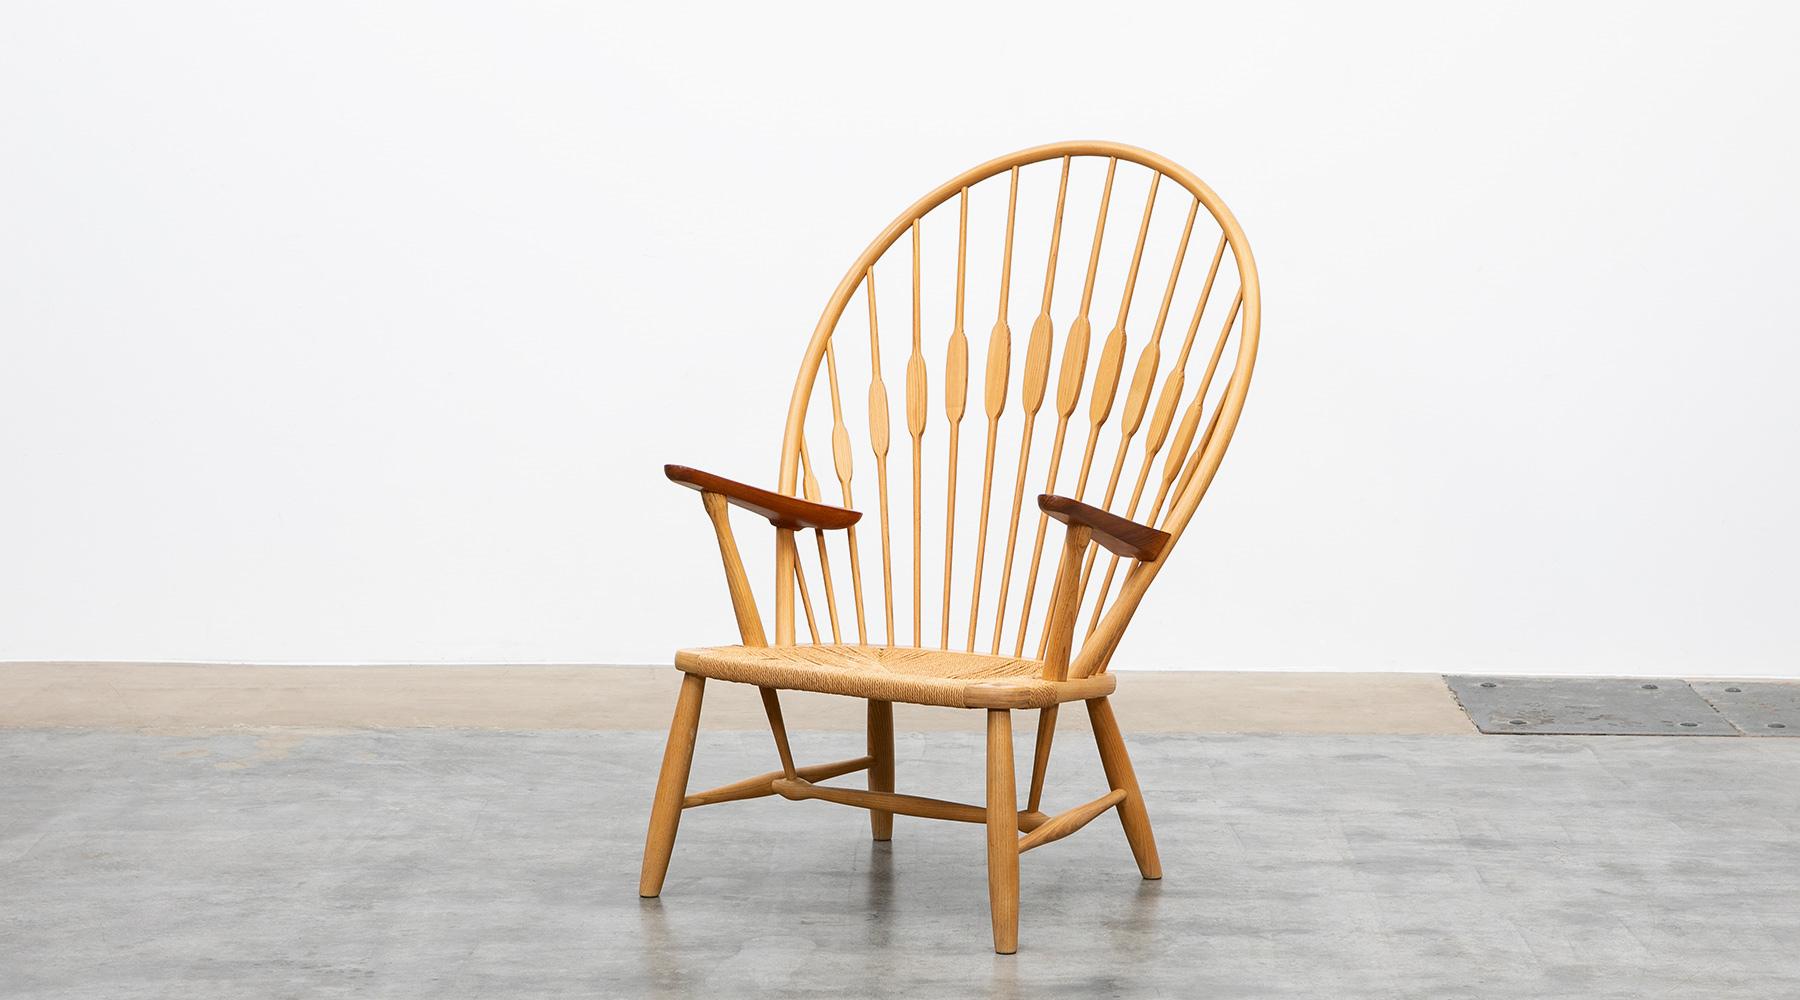 Peacock chair, ash, papercord by Hans Wegner, Denmark, 1947.

Ashwood frames with teak armrests and original paper cord seat make the iconic peacock chair by Hans J. Wegner a work of art. What makes it special is the fusion of ergonomics and